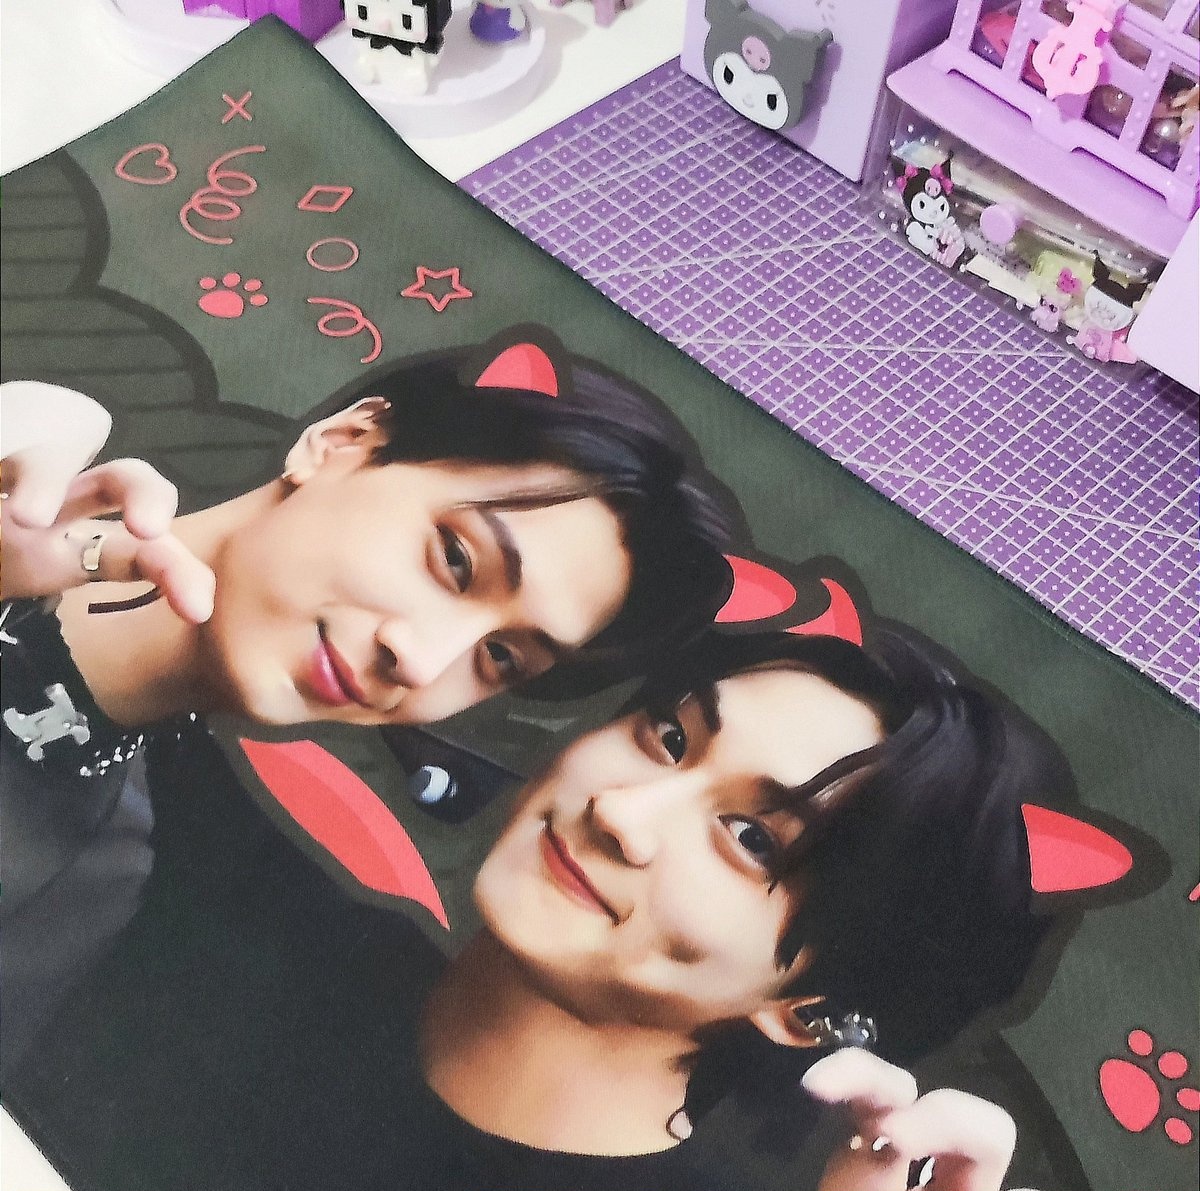 wts lfb ph meowz red and black cheering kit • 550 php (bought for 750) can lower if payo • used only during manilafesto • flexi dop reply or dm to claim t. enhypen enha jay jungwon jaywon slogan